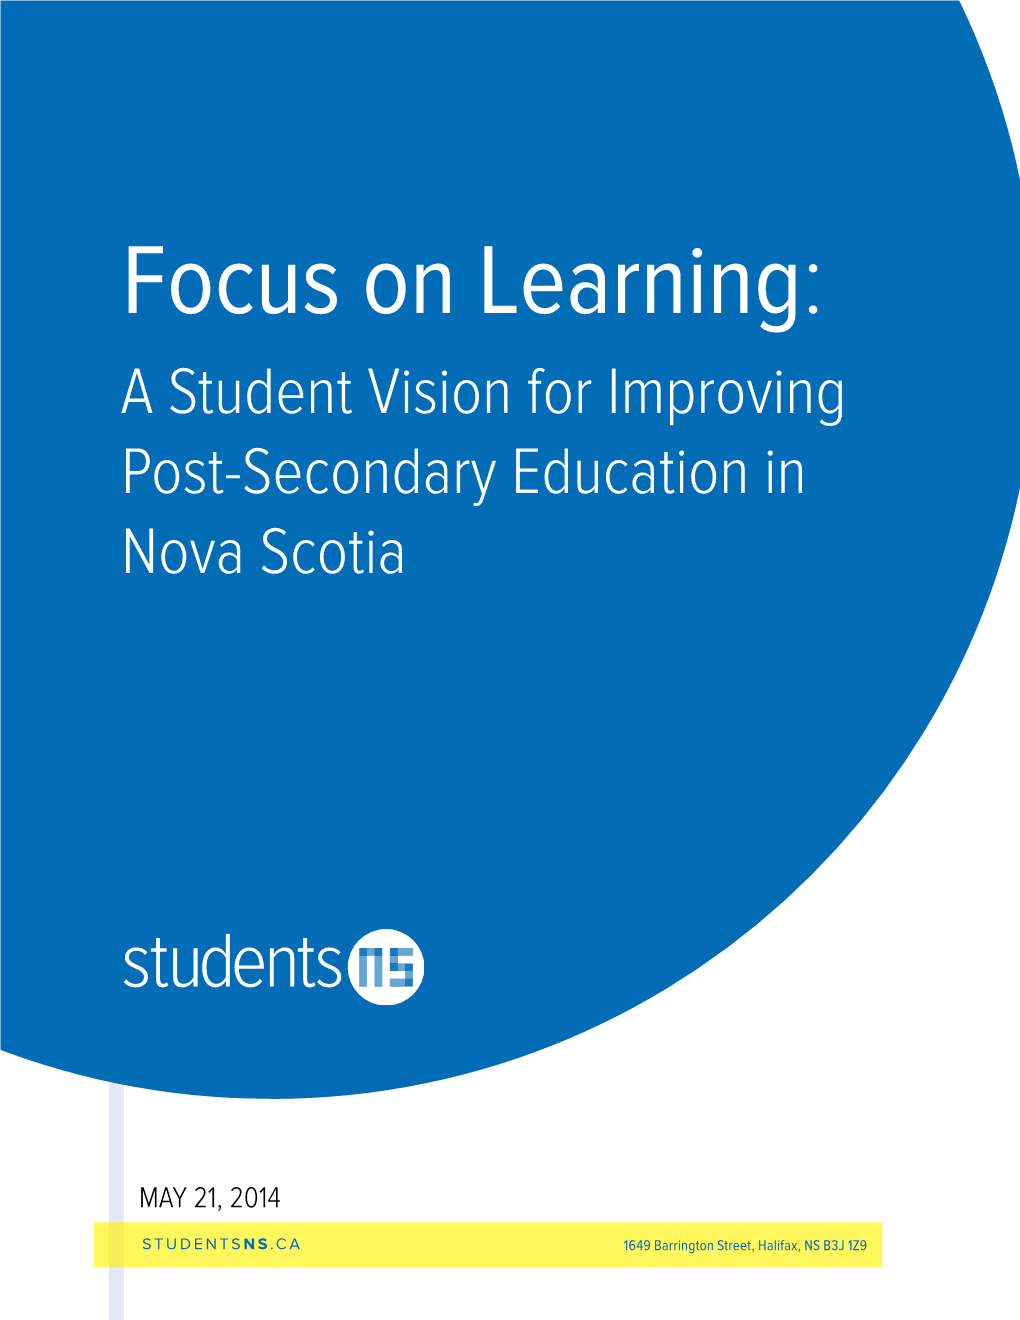 Focus on Learning: a Student Vision for Improving Post-Secondary Education in Nova Scotia